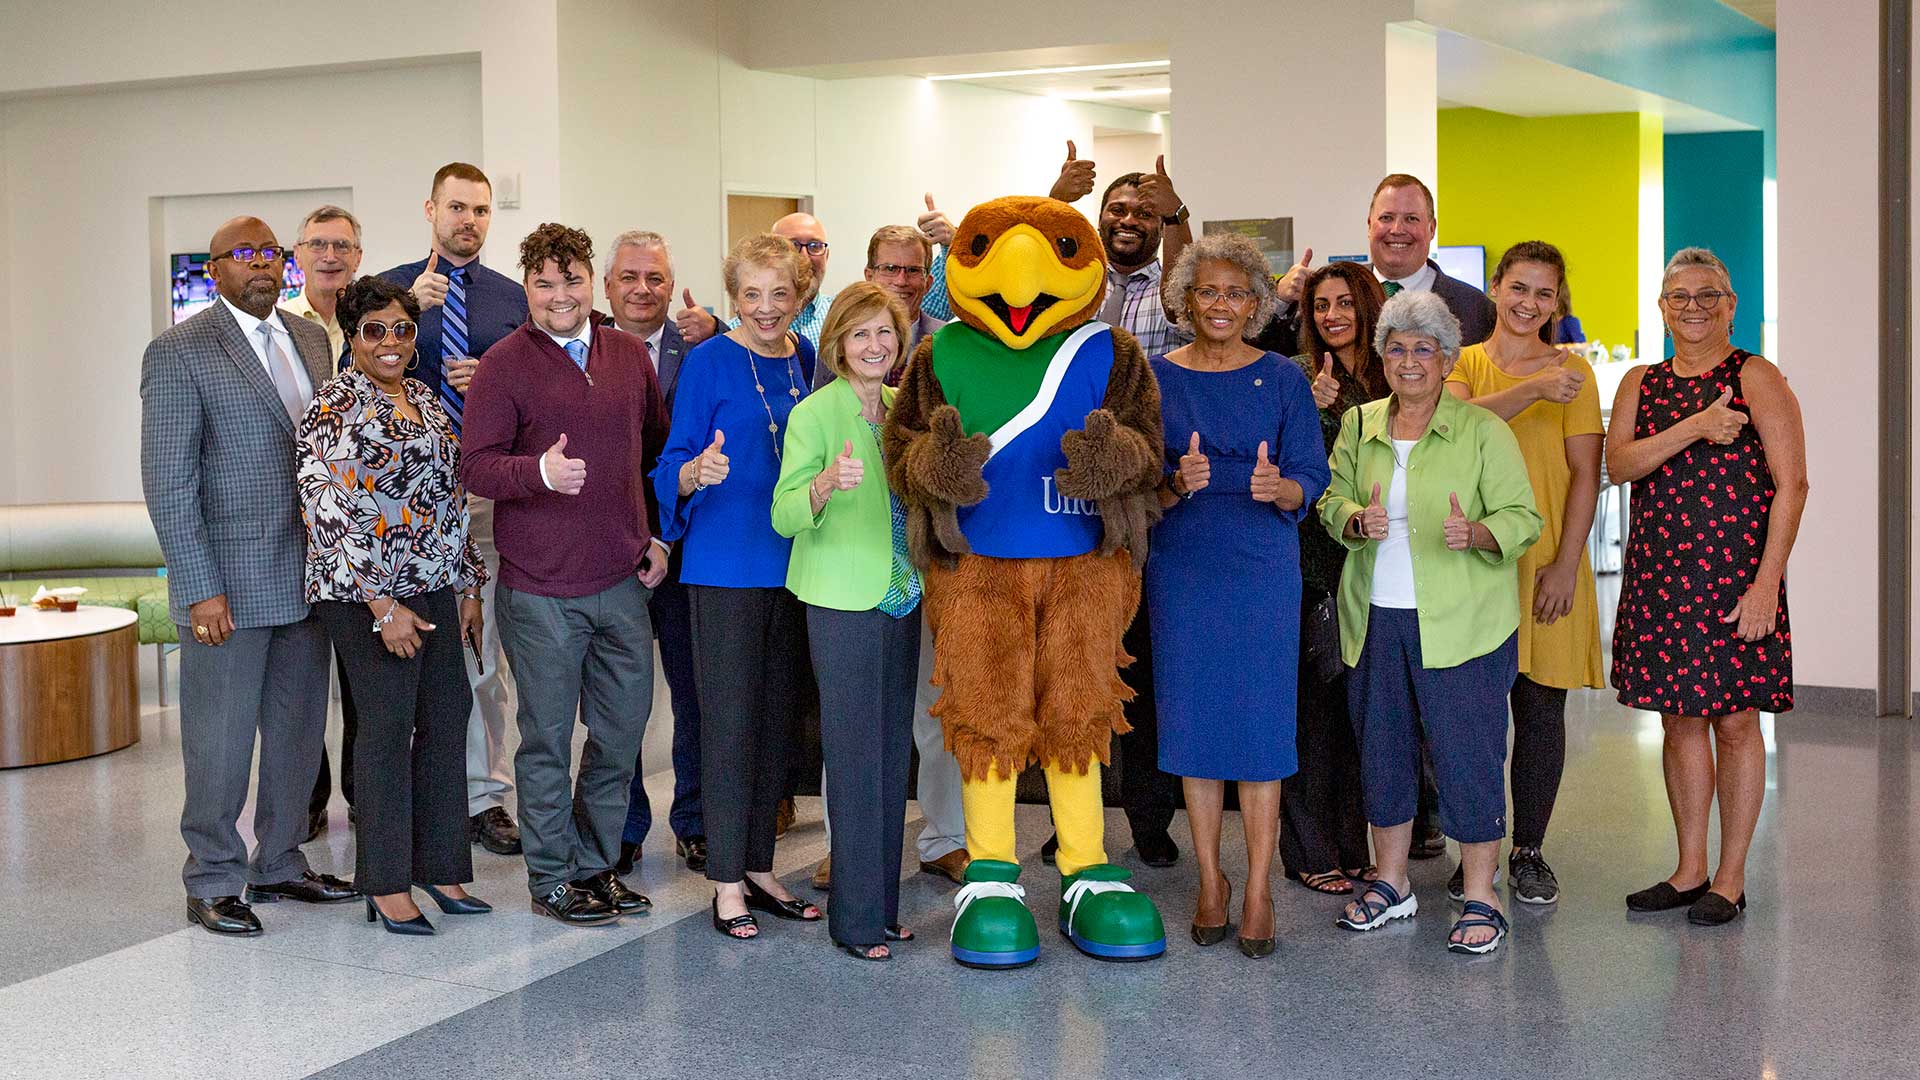 Hunter the Hawk, President Ira K. Blake, and a gathering of students, faculty, and staff giving a thumb's up sign